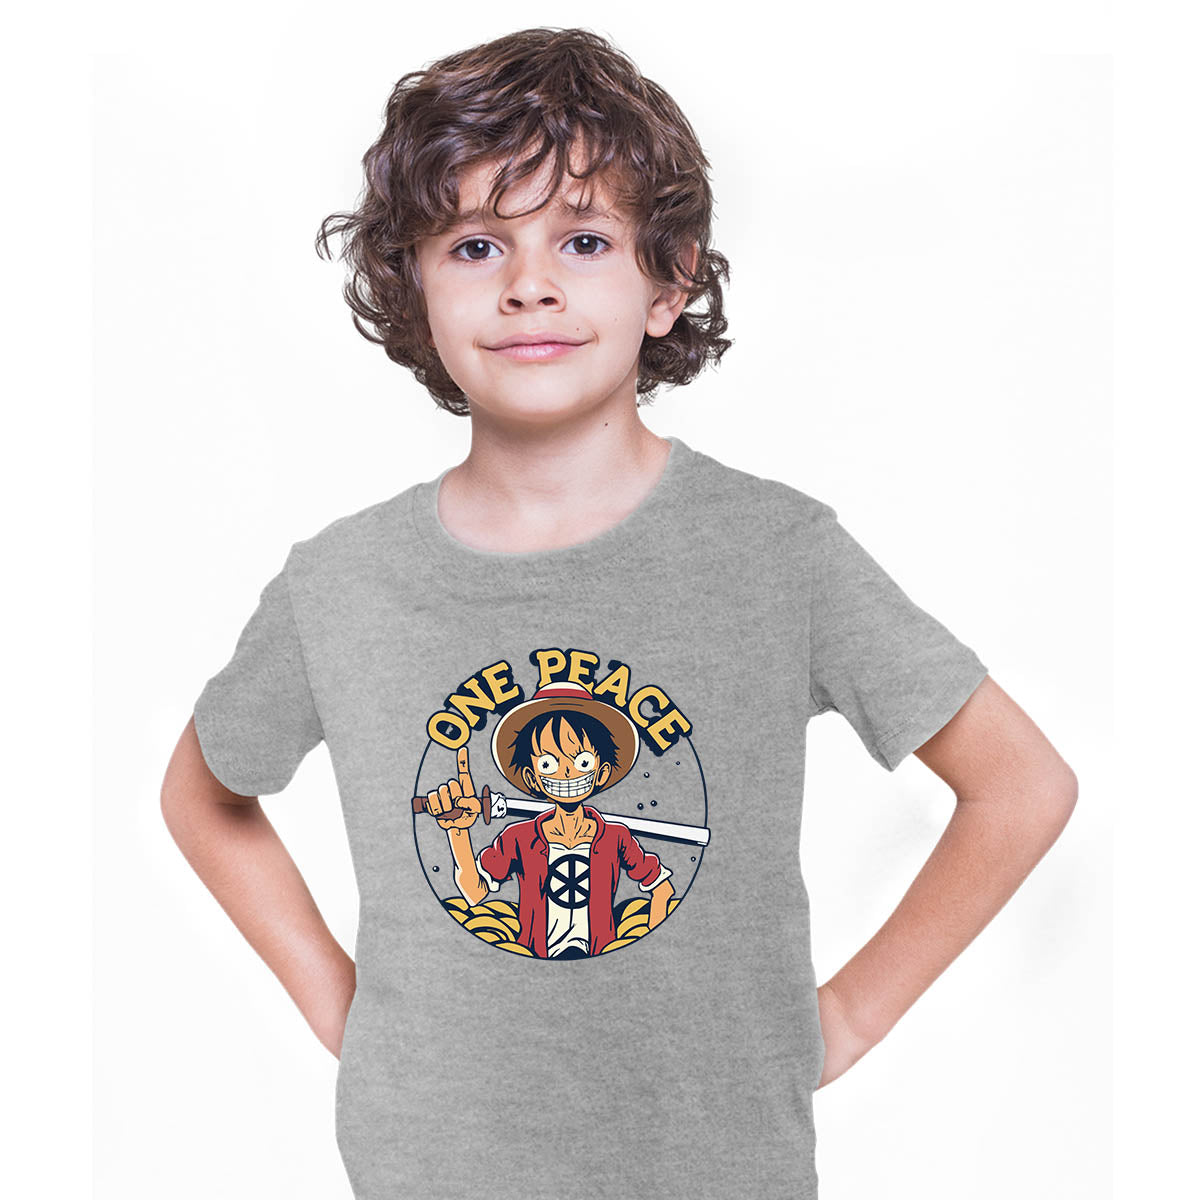 One Peace Monkey D. Luffy Funny One Piece Anime Manga Grey T-shirt for Kids